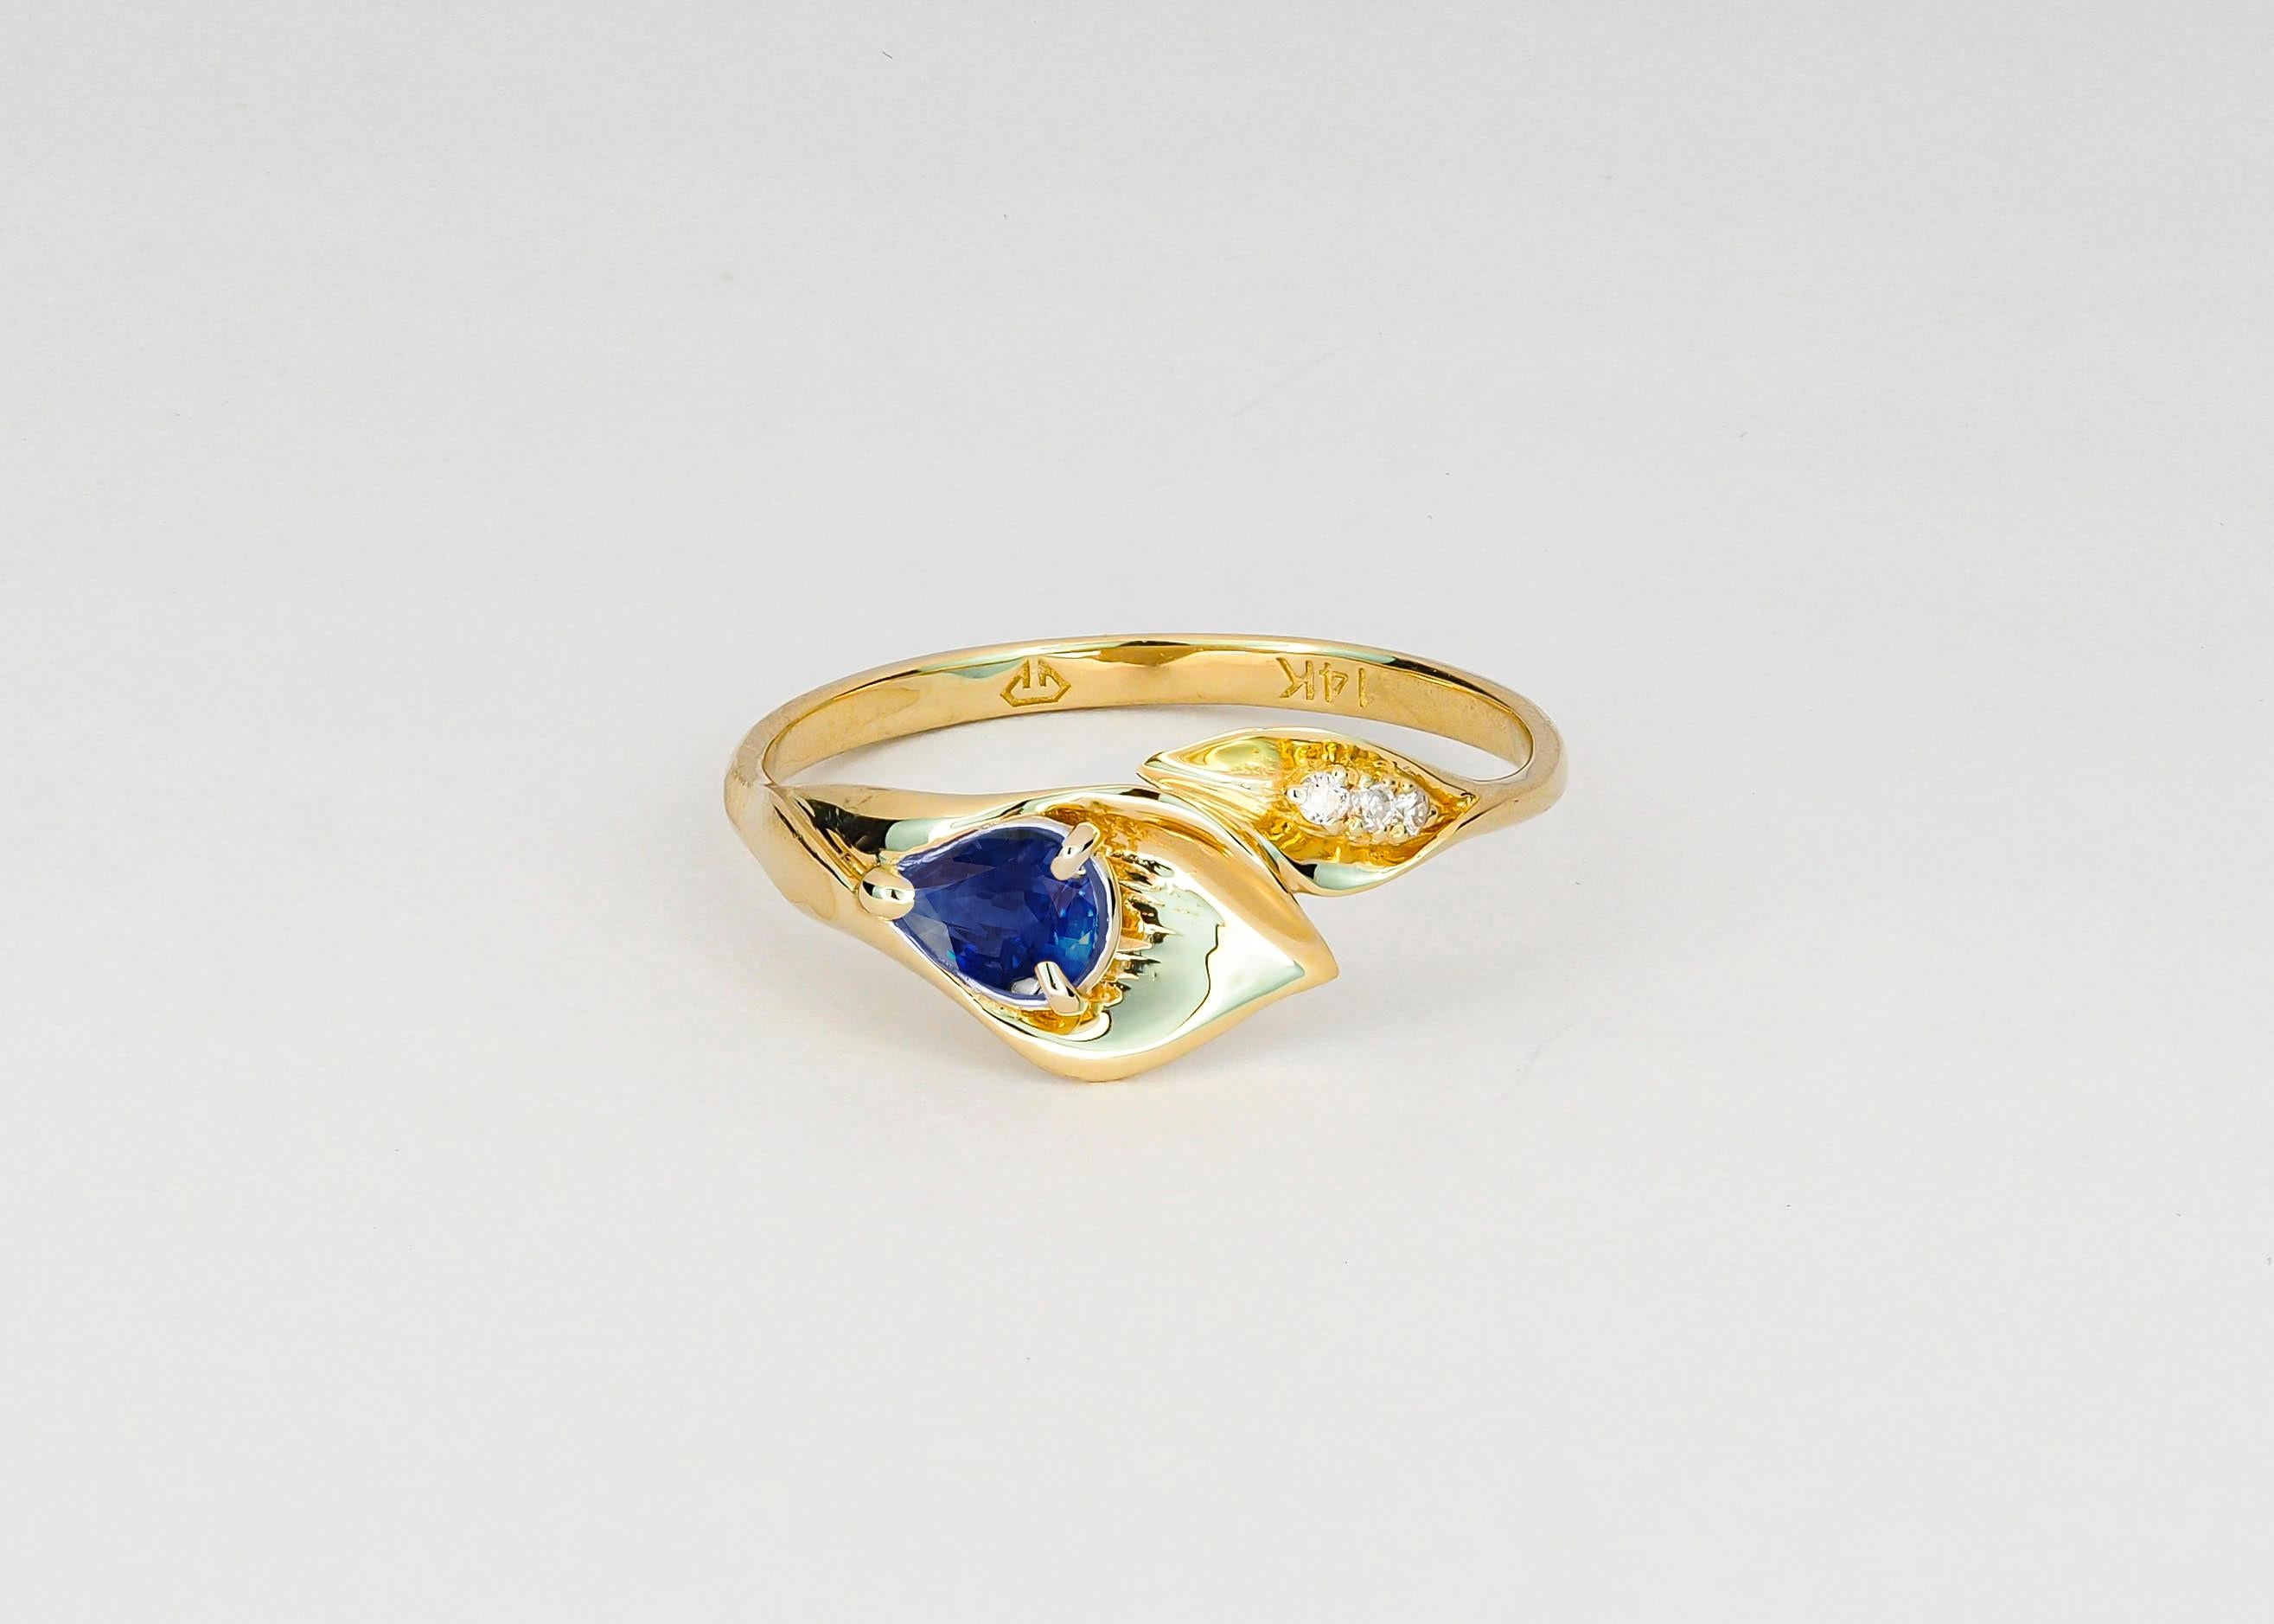 For Sale:  Lily Calla Gold Ring, 14 Karat Gold Ring with Sapphire and Diamonds 3